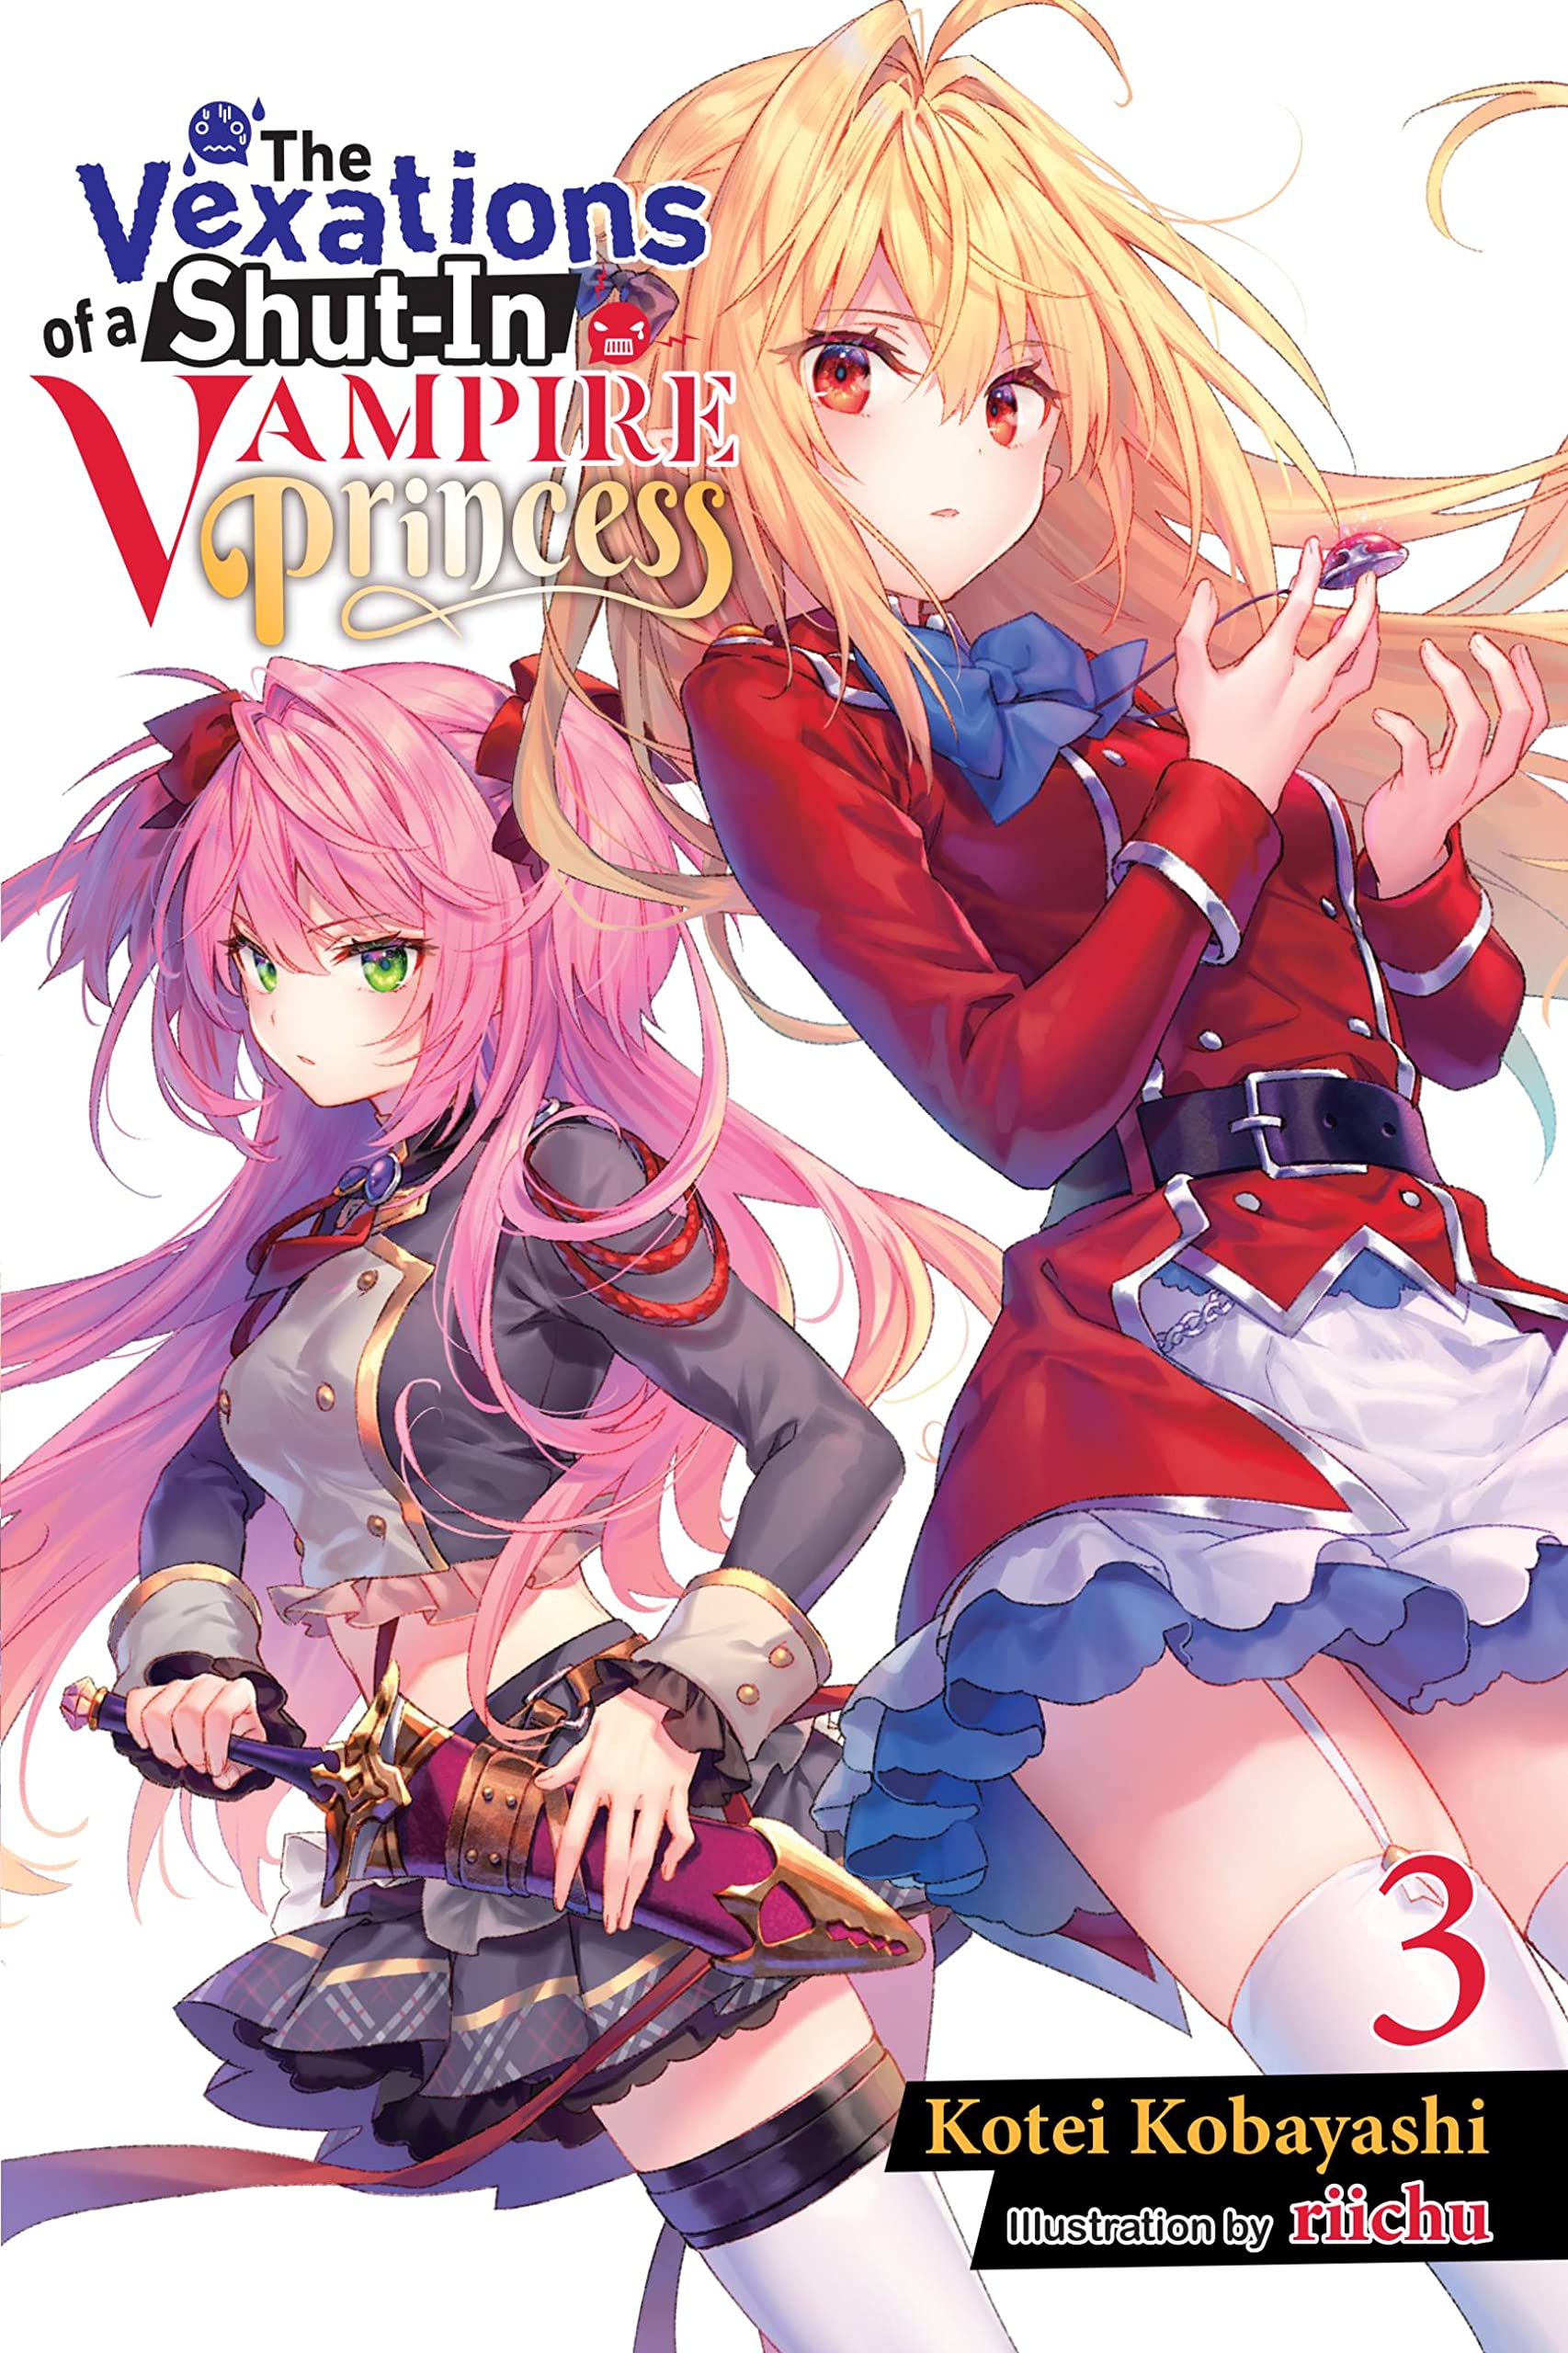 The Vexations of a Shut-In Vampire Princess Volume 3 Shows Love Trumps Hate  - DarkSkyLady Reviews